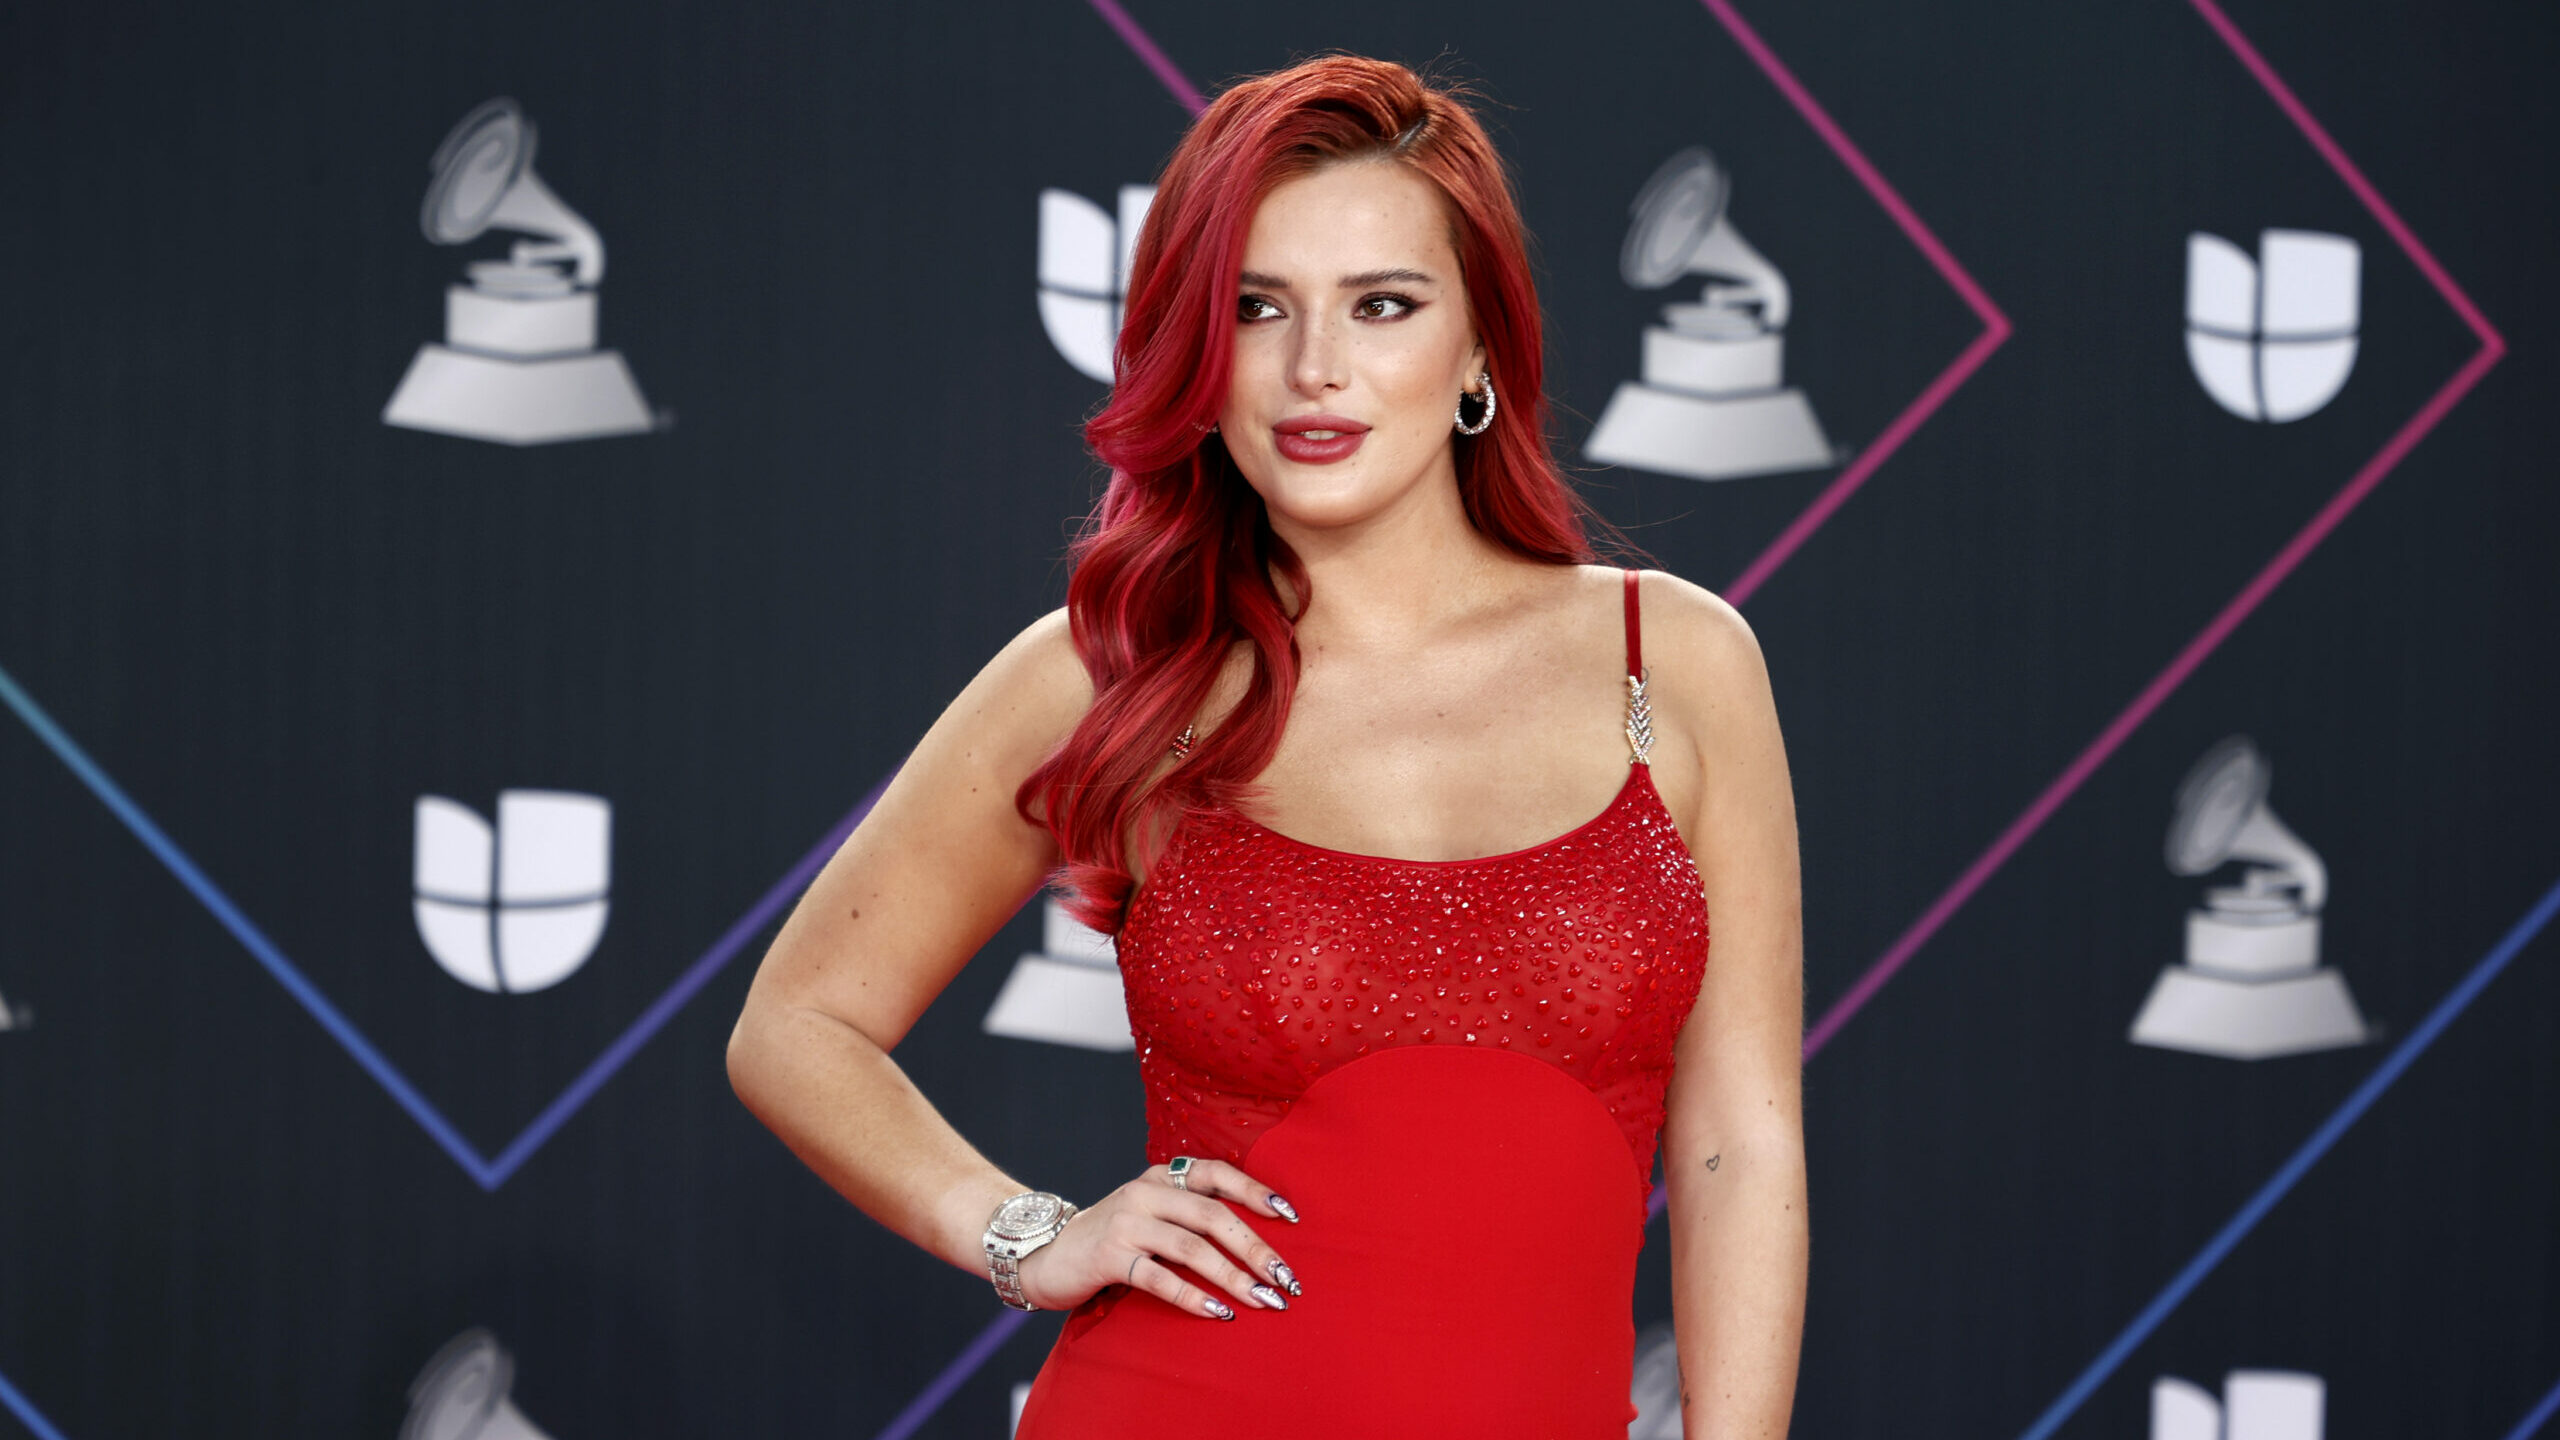 Bella Thorne Romance Movie Climbing Up the Streaming Charts